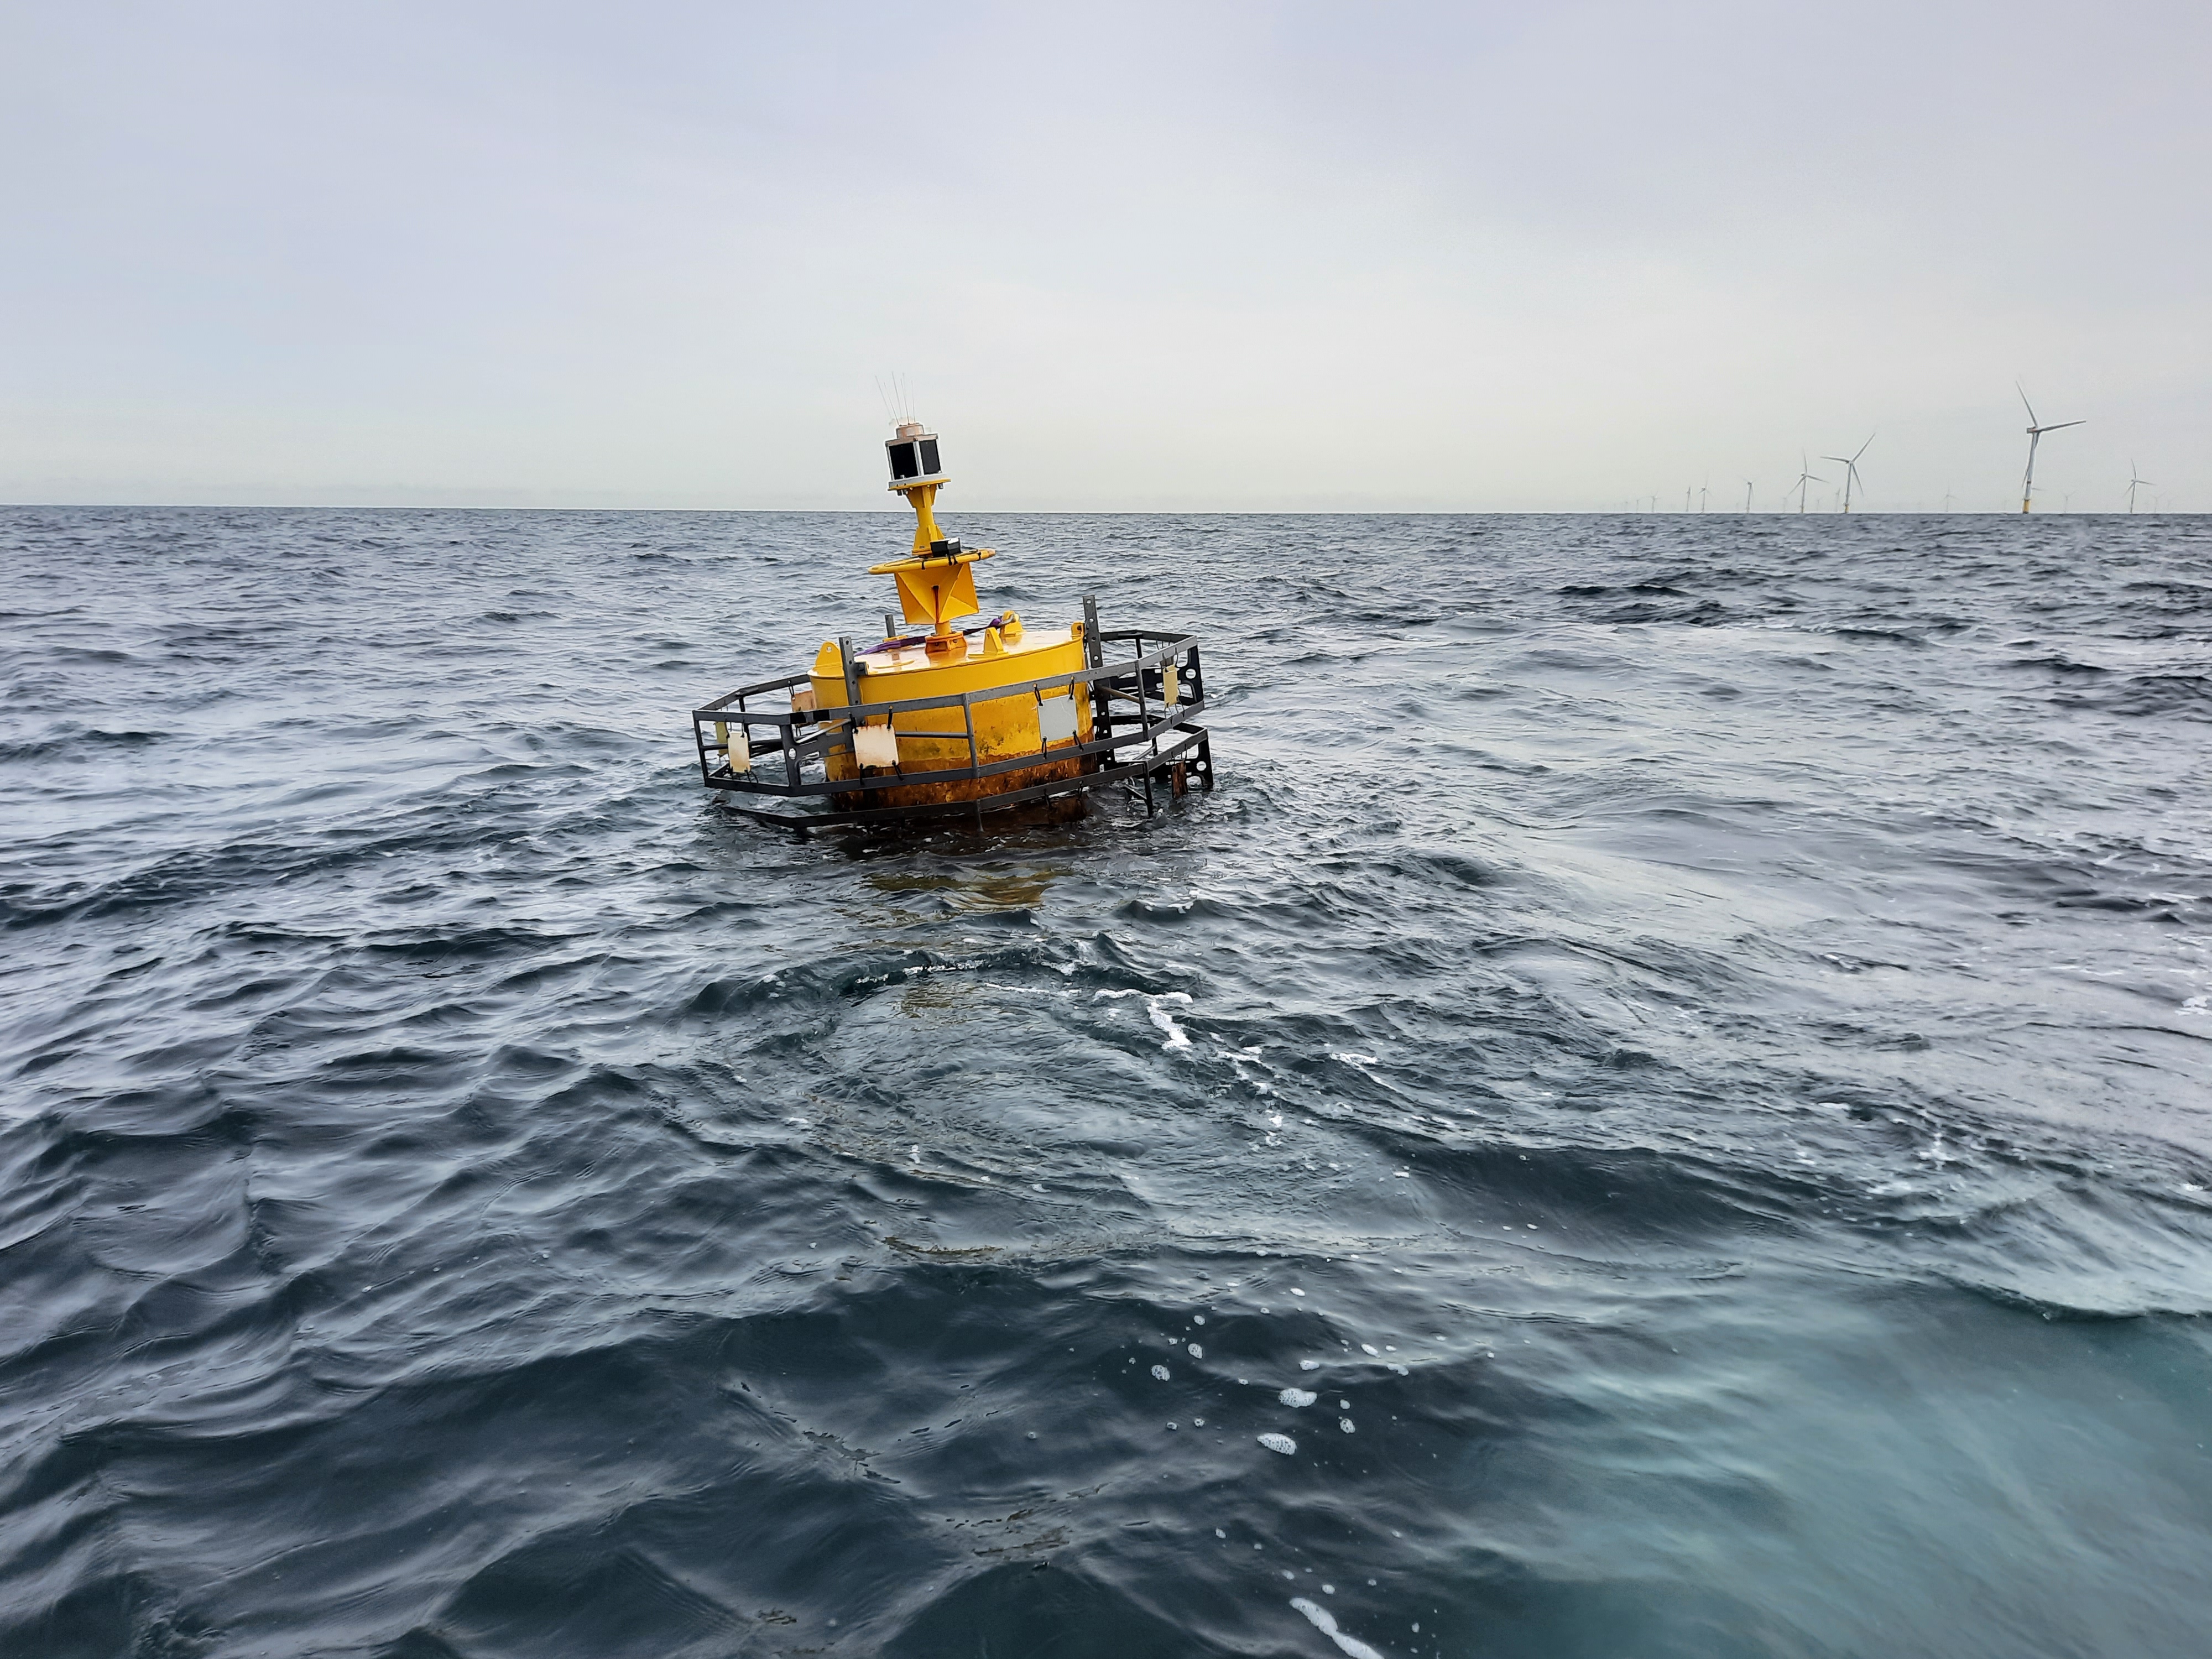   One Littoral Module, prior to the sampling event. ©Mareco – Institute of Natural Sciences